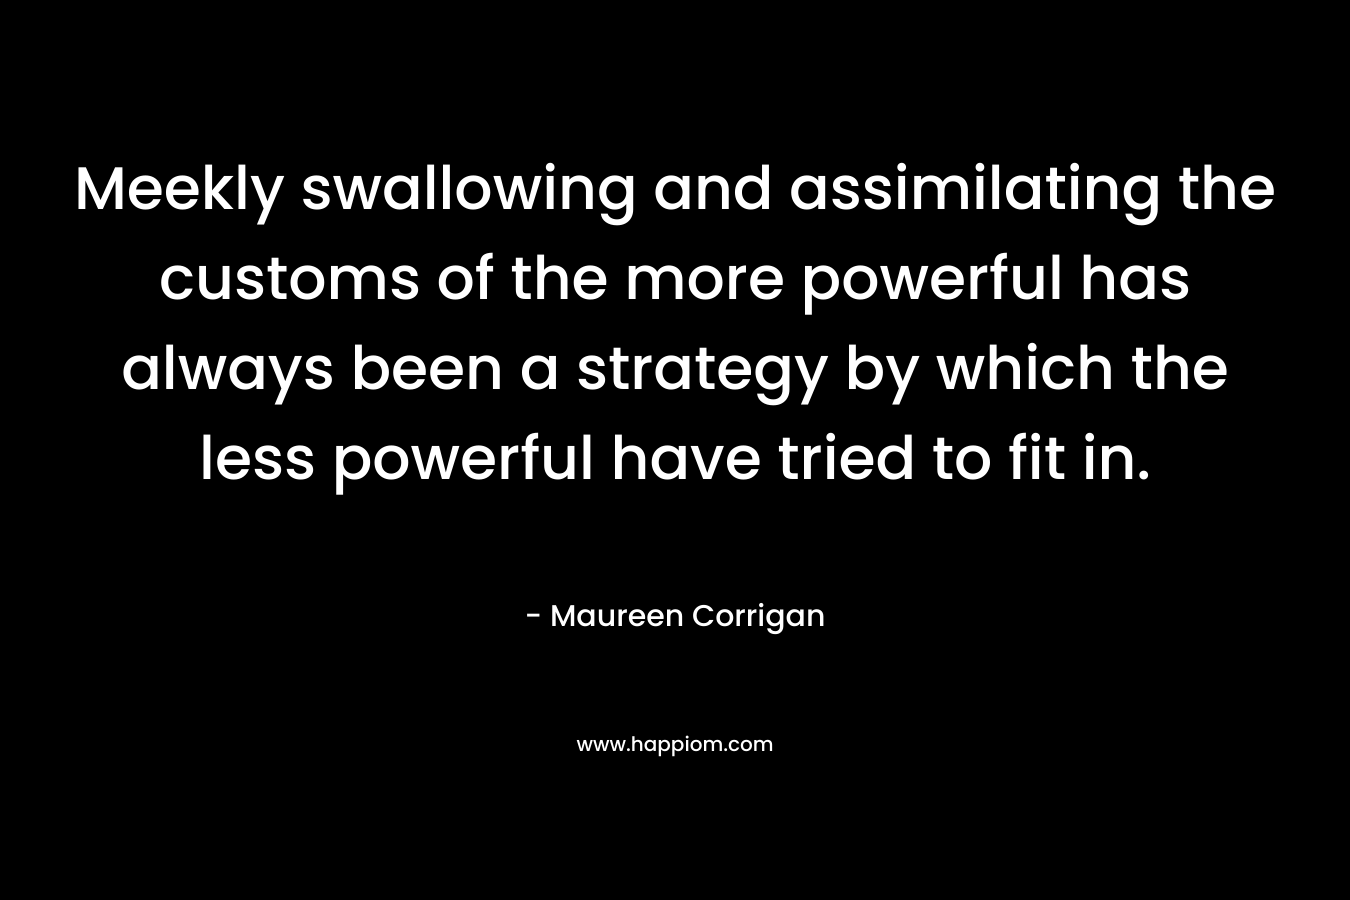 Meekly swallowing and assimilating the customs of the more powerful has always been a strategy by which the less powerful have tried to fit in. – Maureen Corrigan